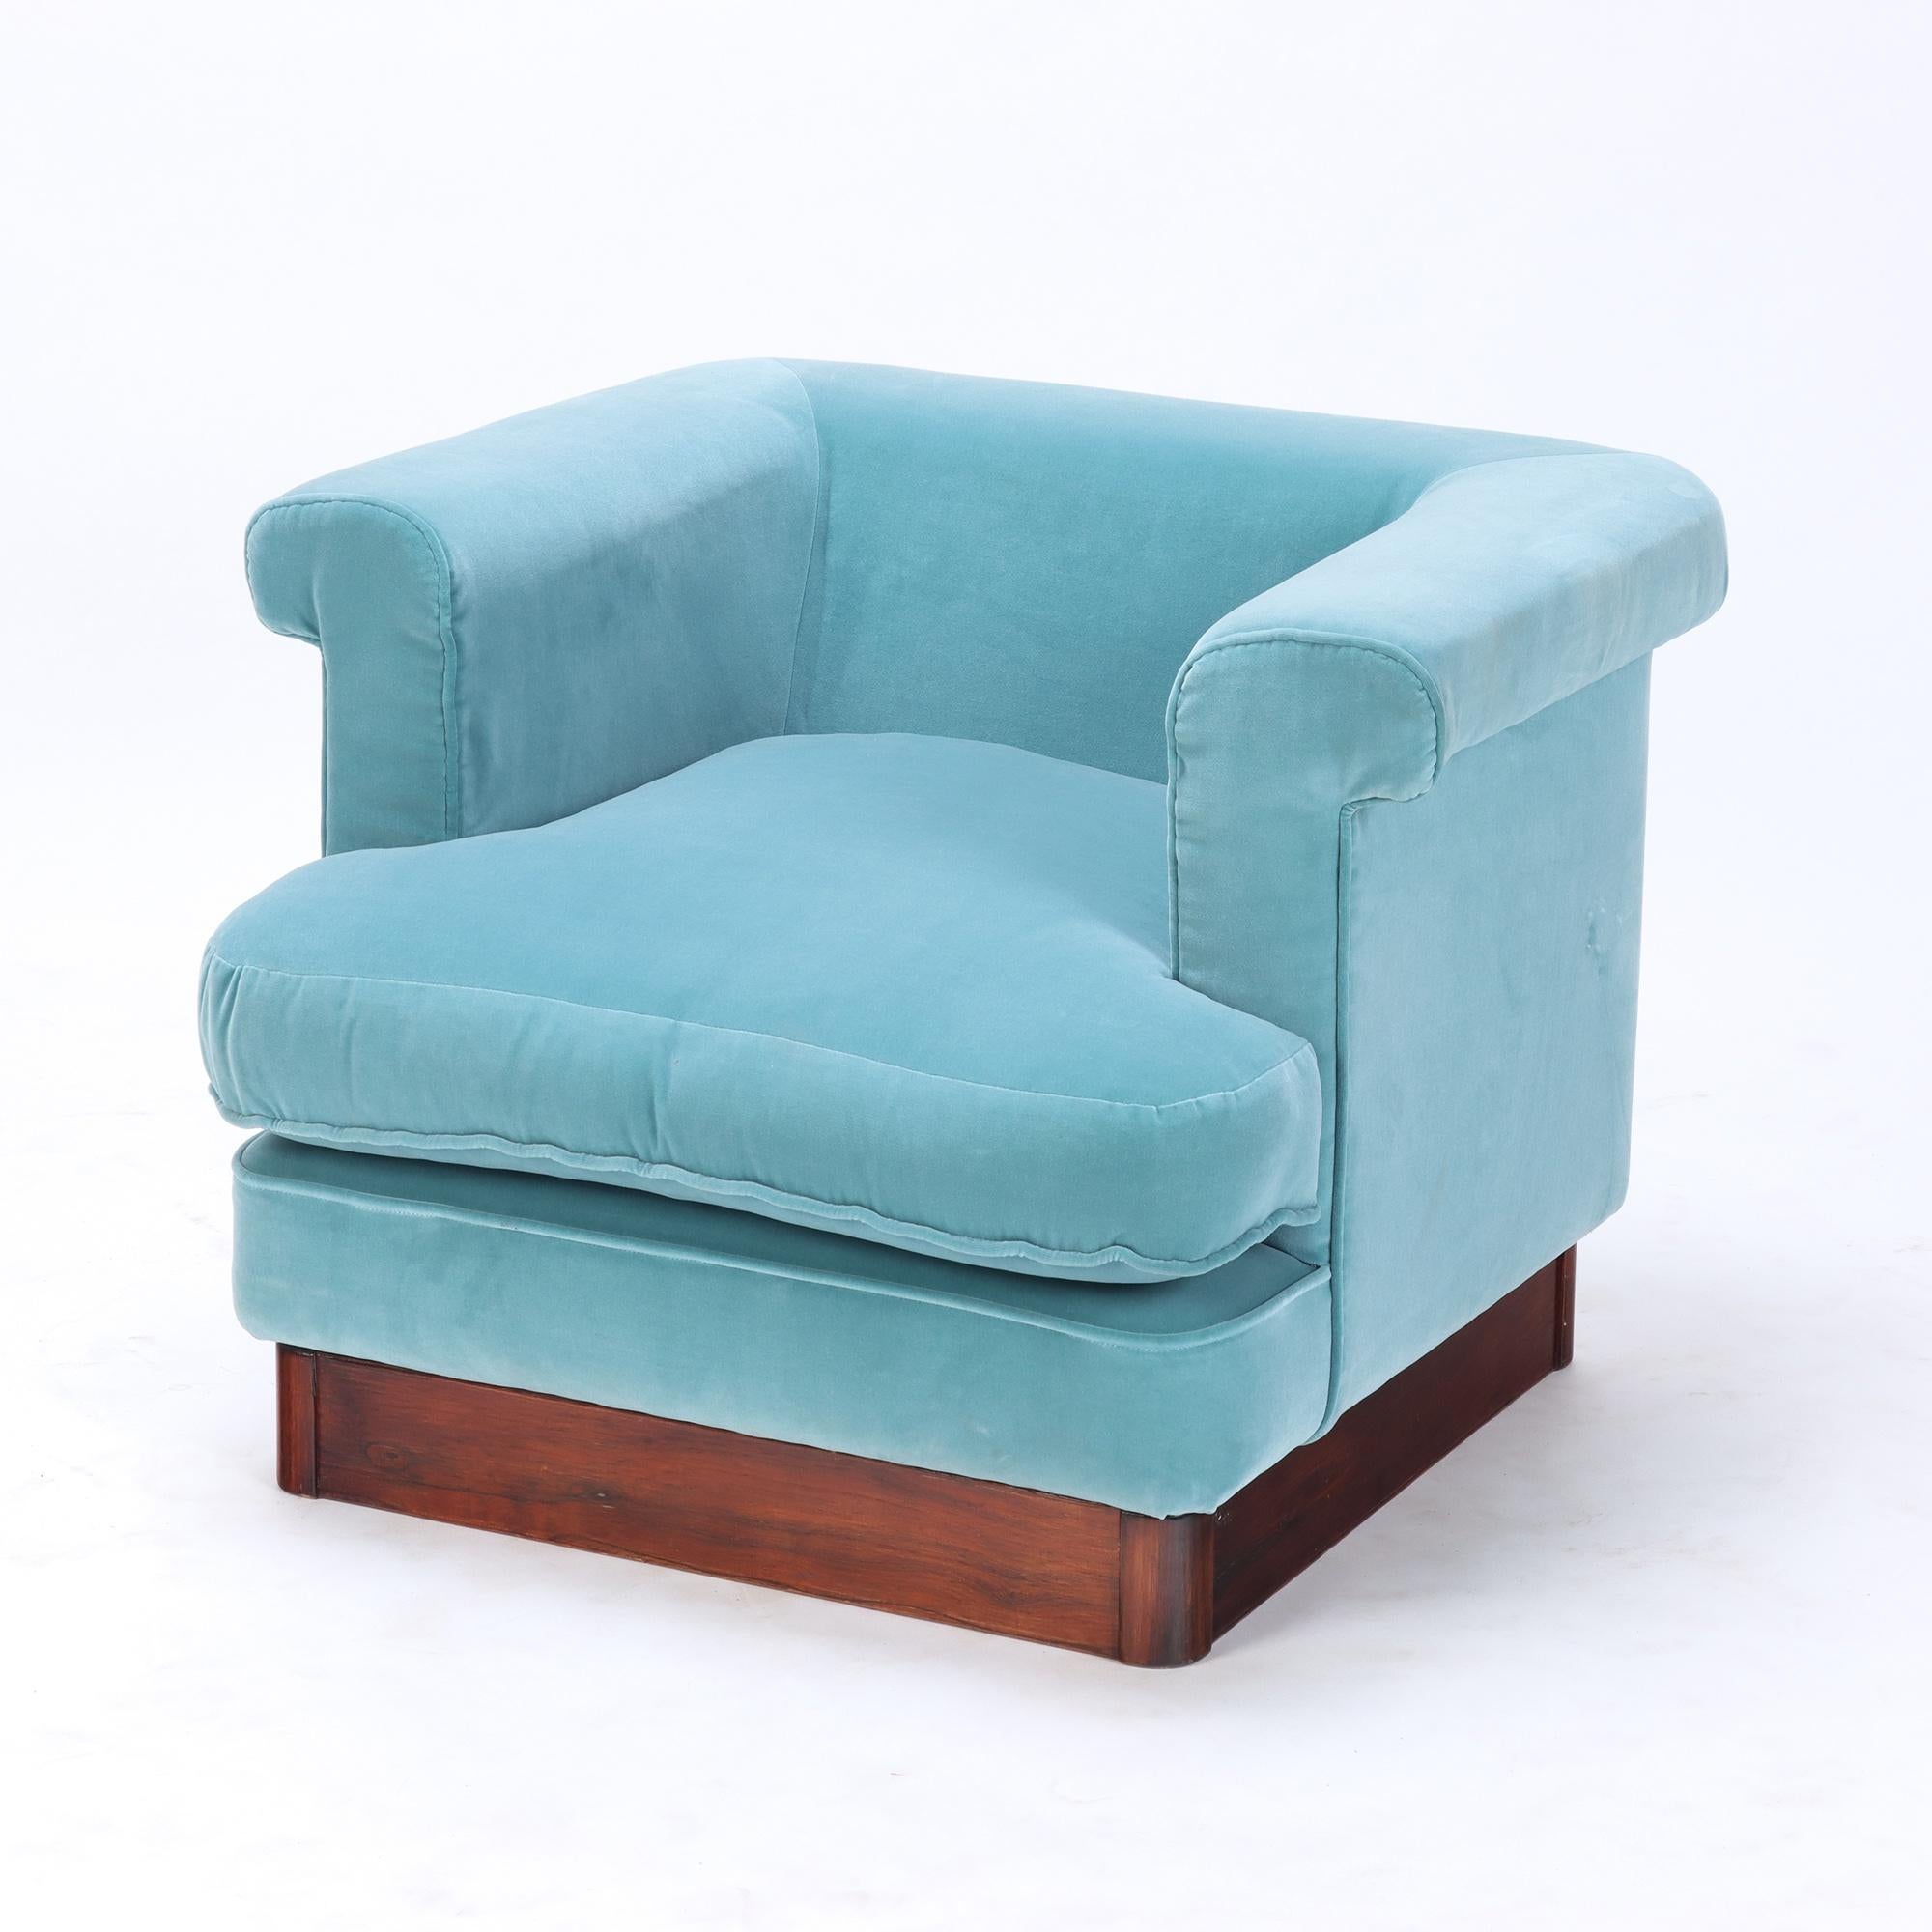 A pair of glamorous Italian blue velvet upholstered cube/club chairs, resting on a wood base. C 1970.